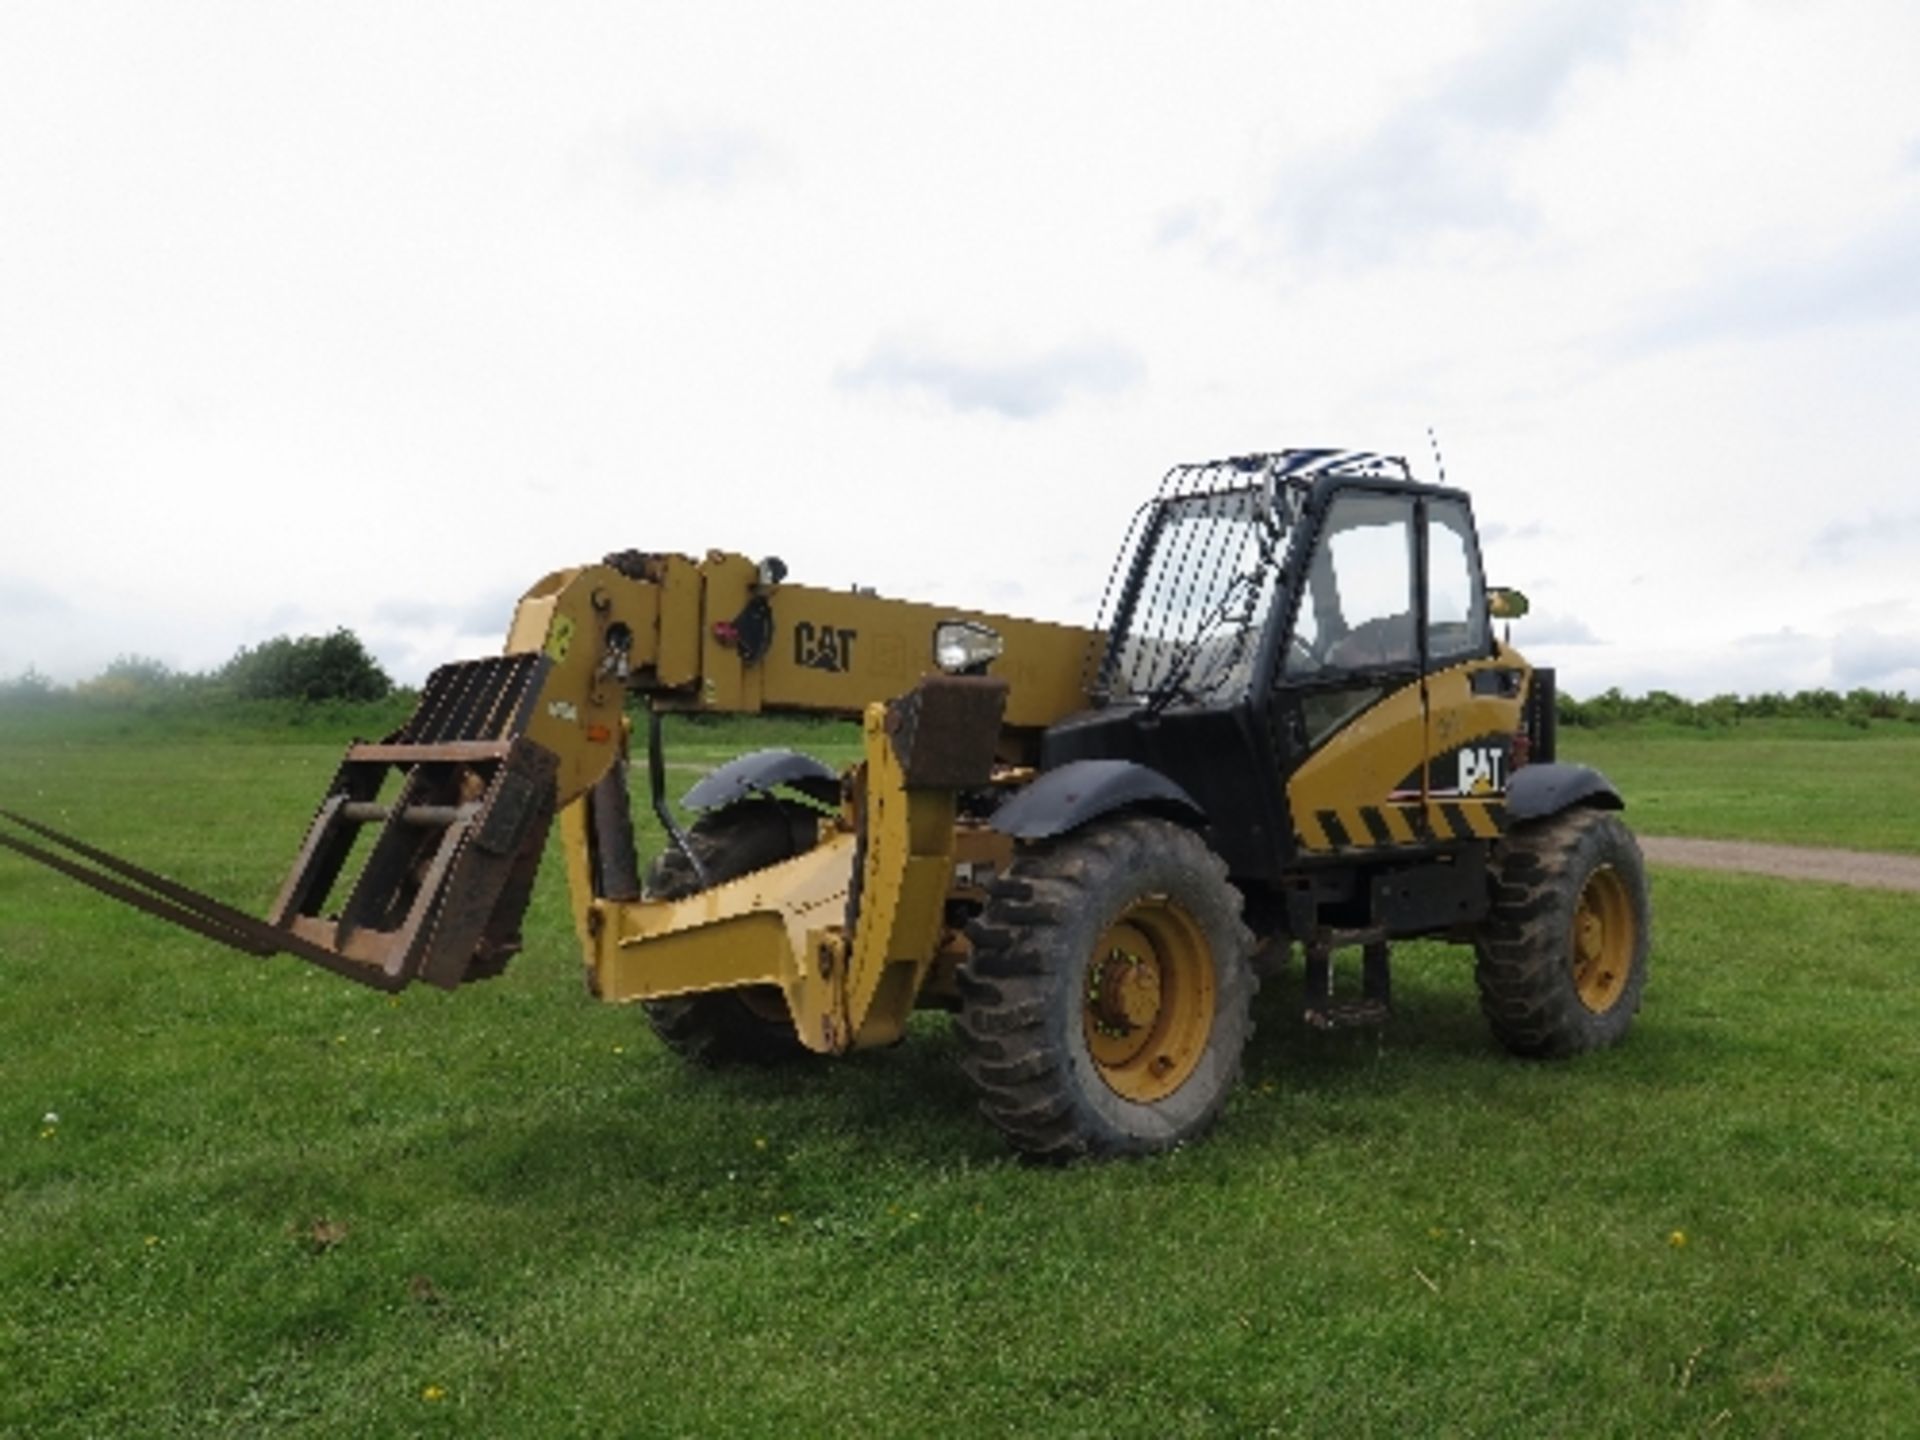 Caterpillar TH355B telehandler 3999 hrs 2005 136402ALL LOTS are SOLD AS SEEN WITHOUT WARRANTY